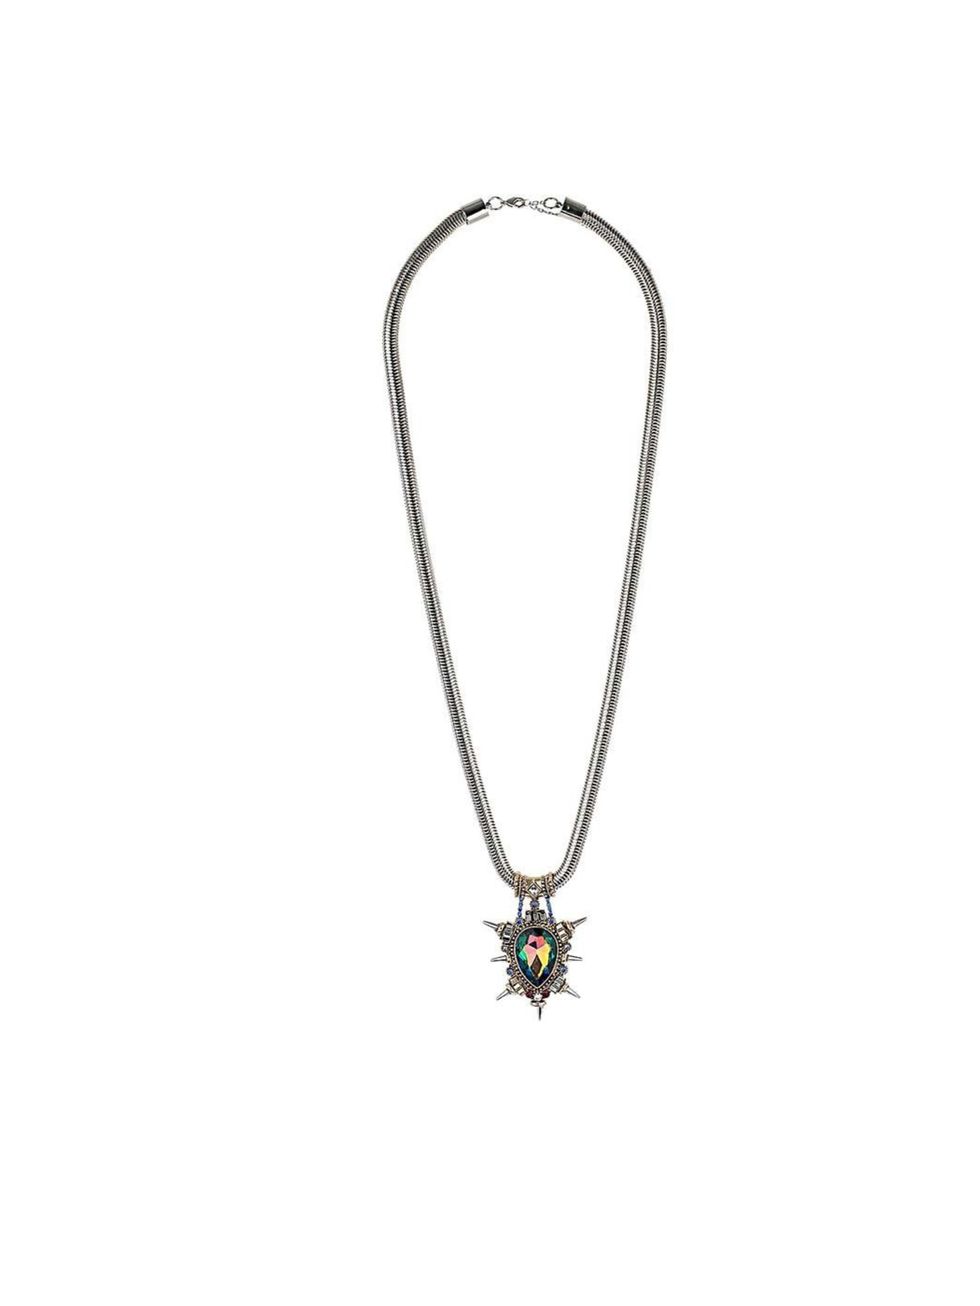 <p>Premium jewel spike necklace from <a href="http://www.topshop.com/webapp/wcs/stores/servlet/ProductDisplay?beginIndex=1&amp;viewAllFlag=&amp;catalogId=33057&amp;storeId=12556&amp;productId=8077943&amp;langId=-1&amp;sort_field=Relevance&amp;categoryId=2